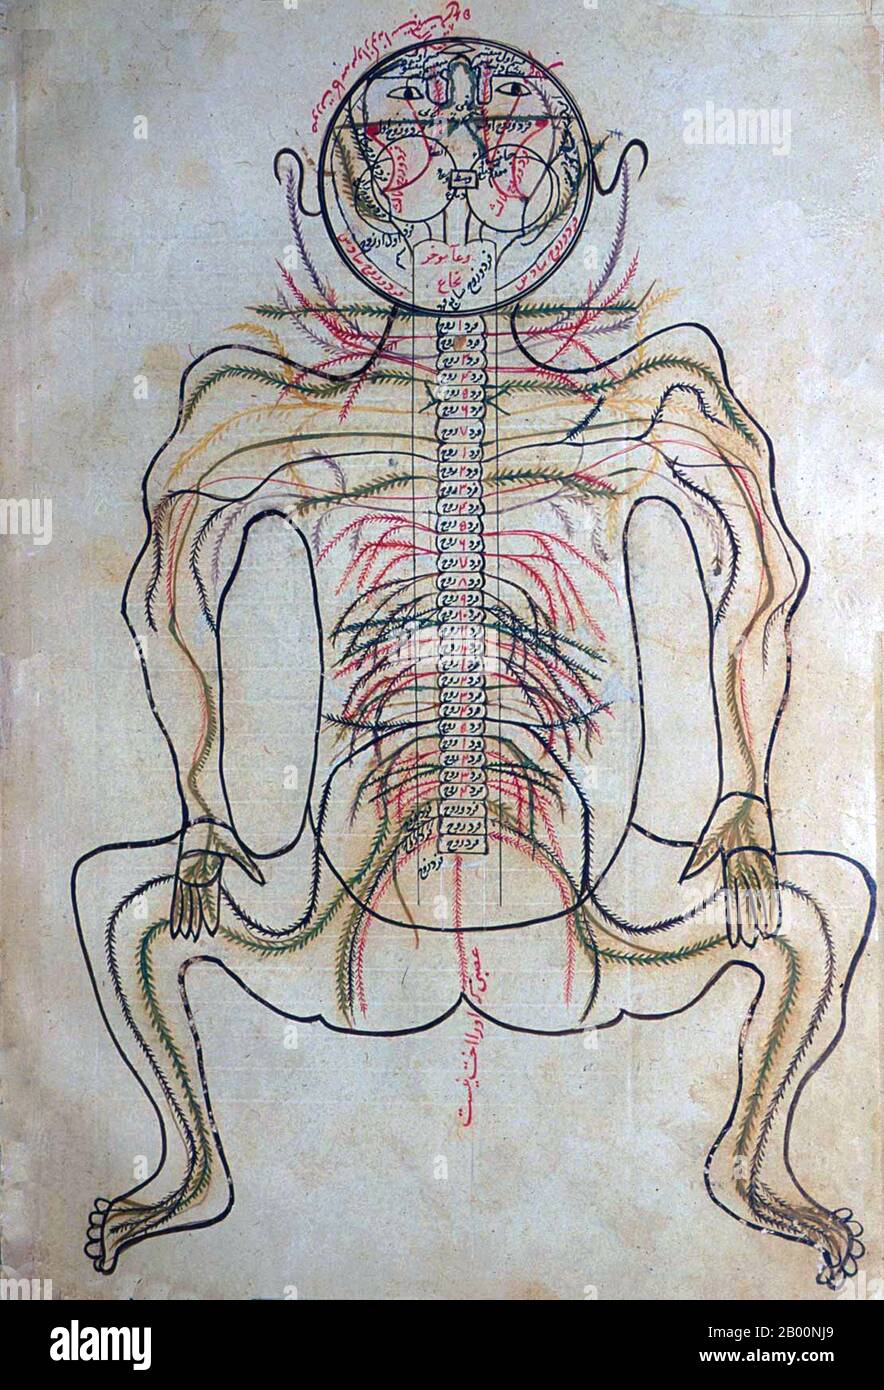 Persia / Iran: 15th century anatomical drawing from the Tashrīḥ-i badan-i insān.  Manṣūr ibn Muḥammad ibn Aḥmad, Tashrīḥ-i badan-i insān ('The Anatomy of the Human Body'). Persian manuscript, copy undated; appearance of paper, handwriting, ink, illustrations, etc. suggest  ca. late 15th or very early 16th century. Stock Photo